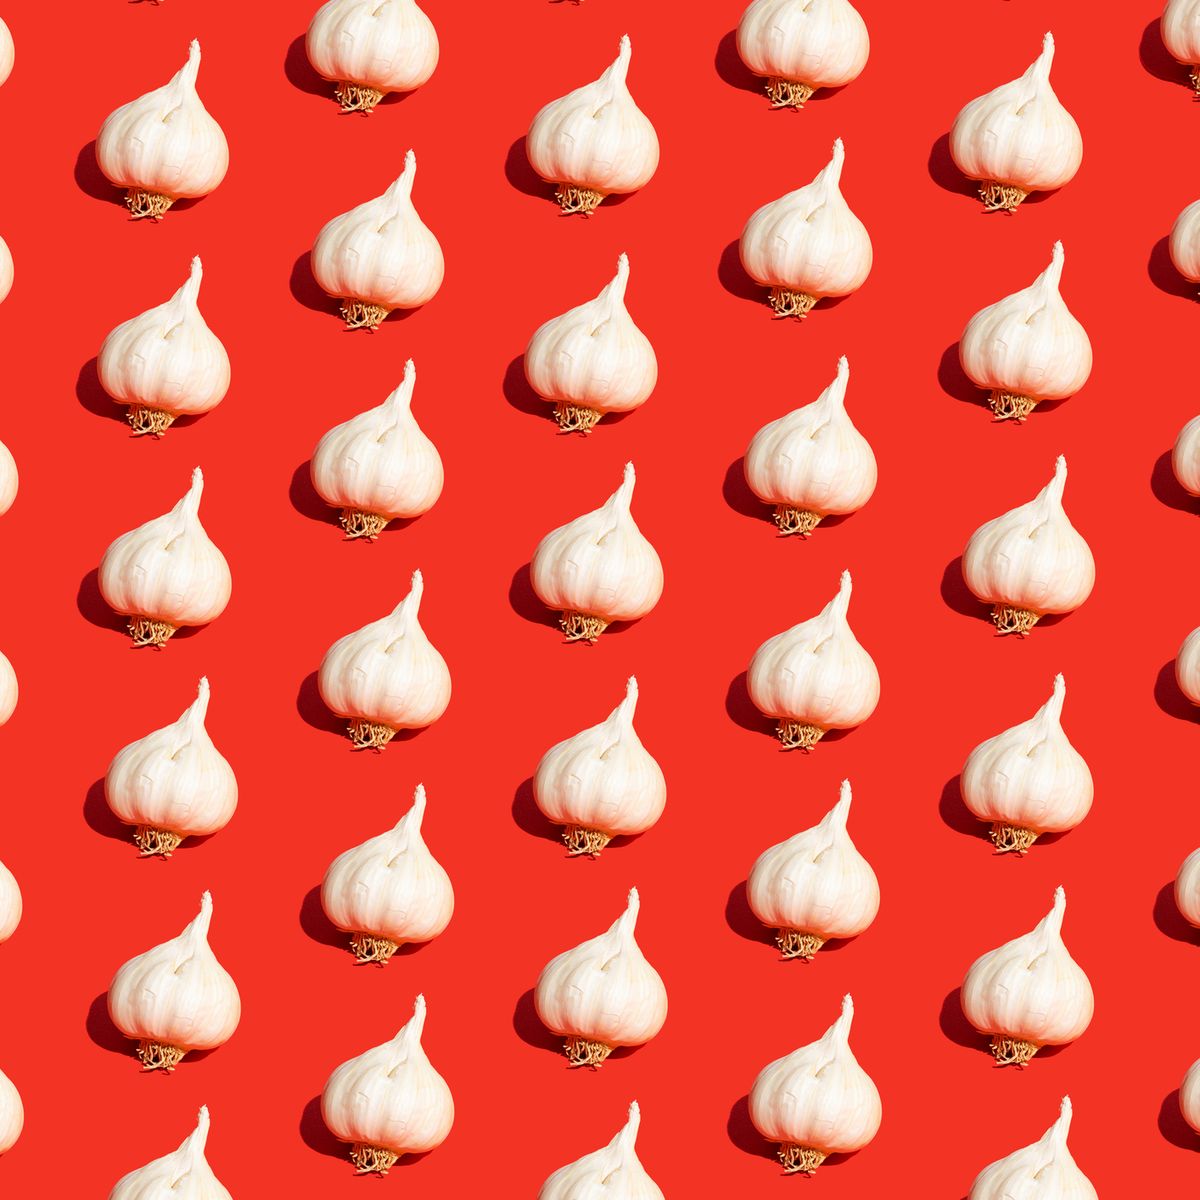 garlic bulbs on red background